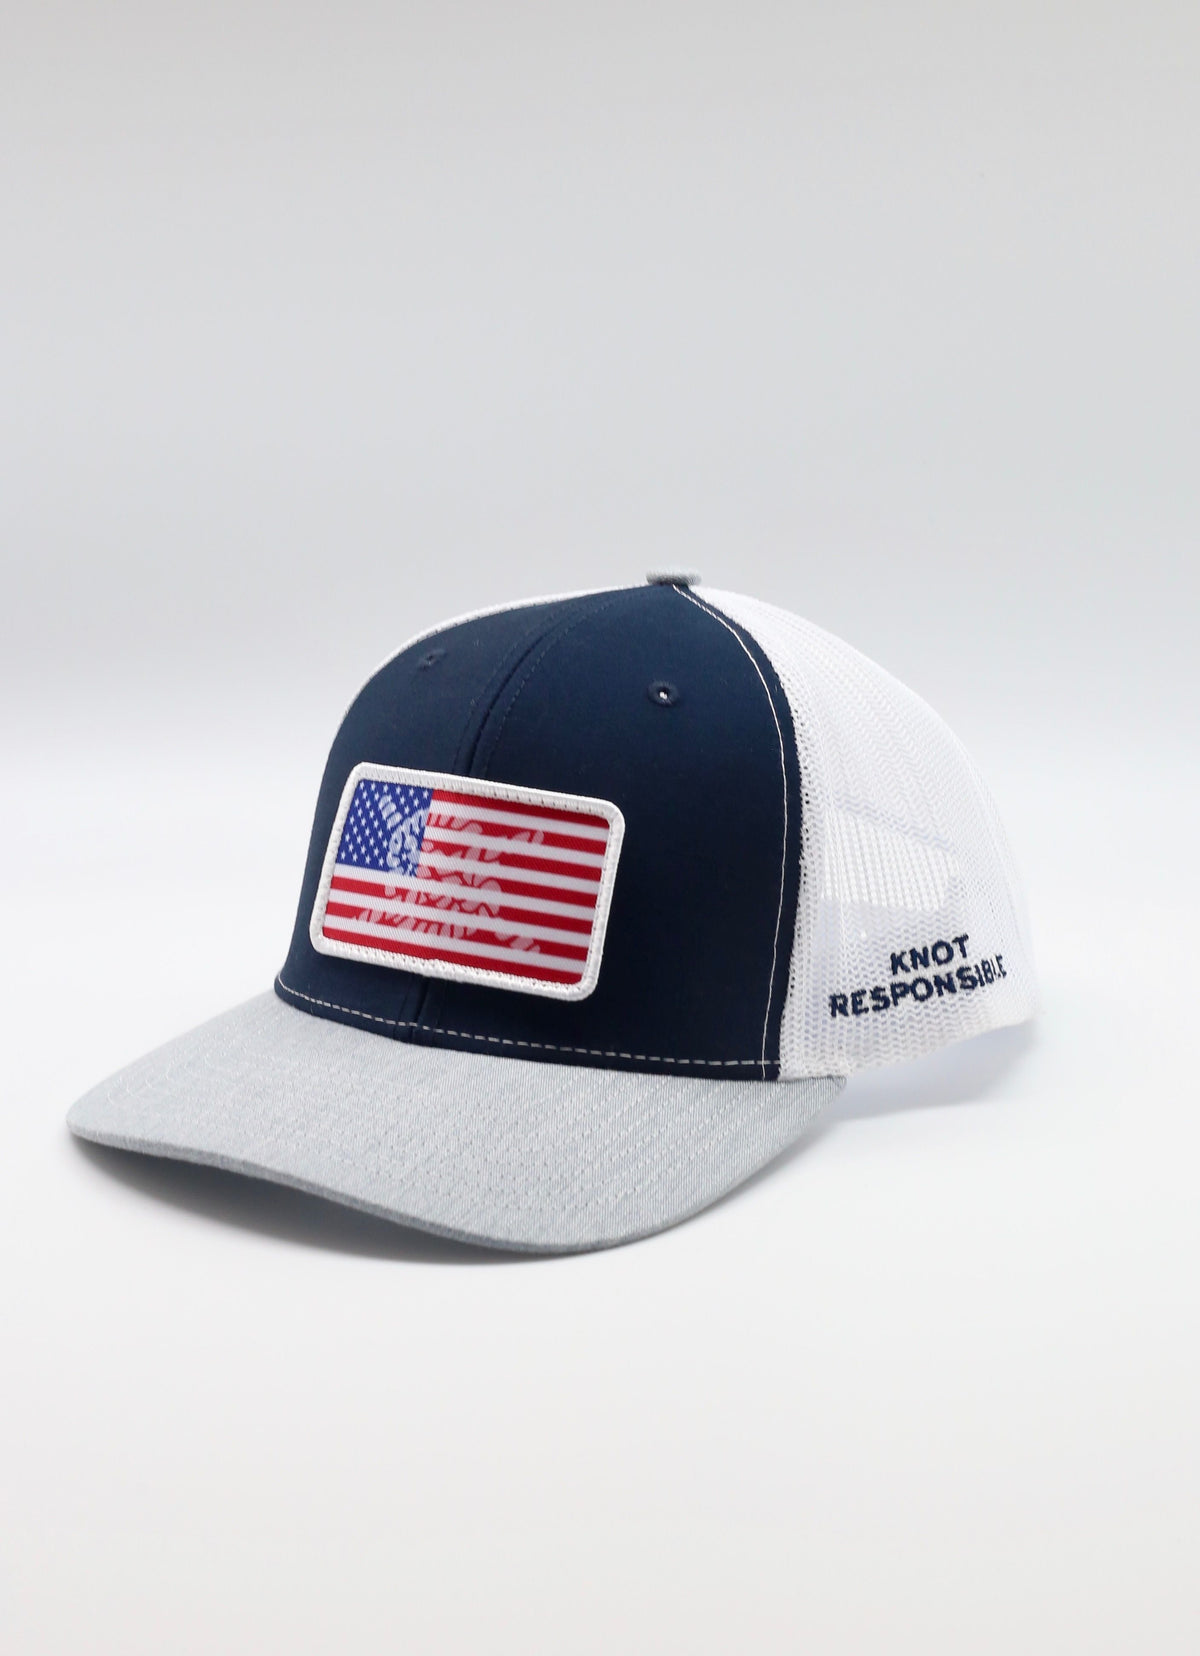 Limited Edition USA Patch Trucker Hat- Navy/White/Grey